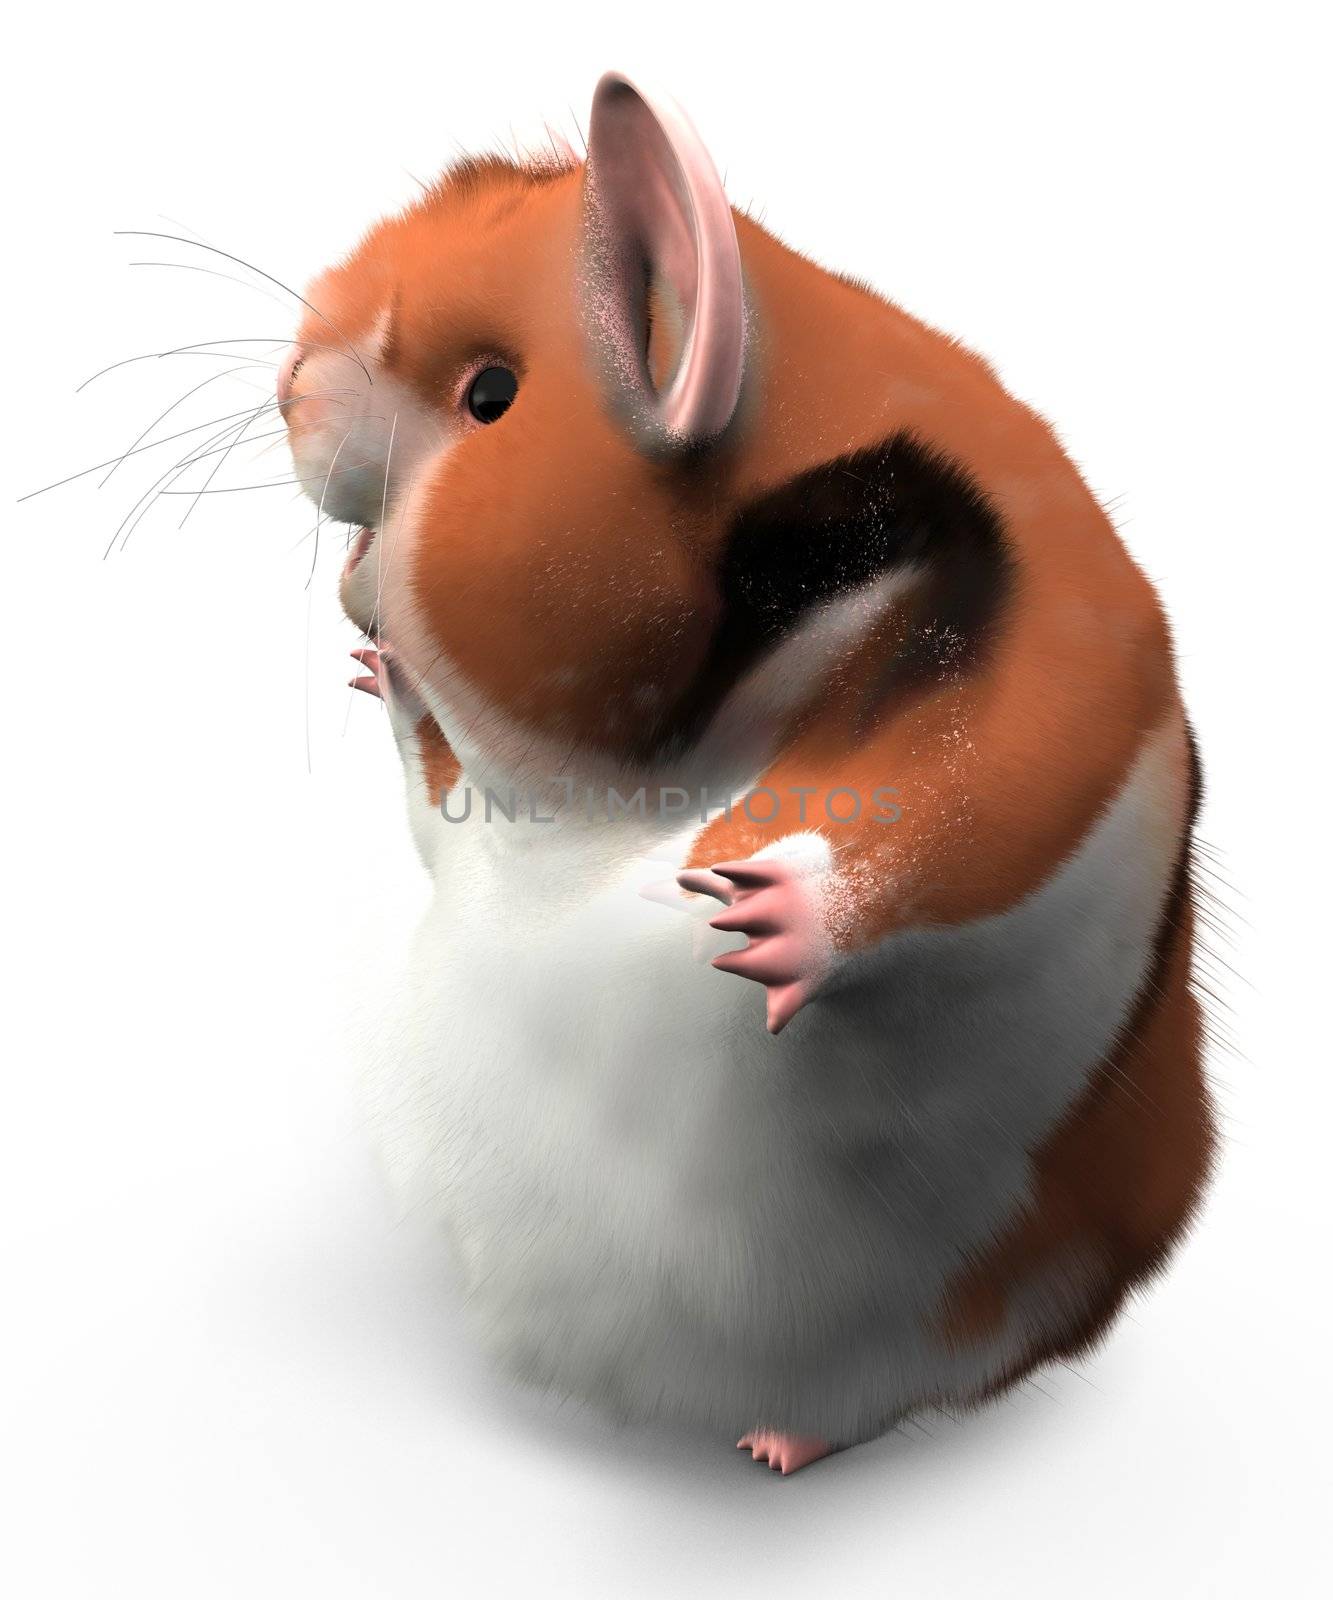 A hamster turned to the side looking happy, possibly waving at someone, or looking at text or design elements to the left. 